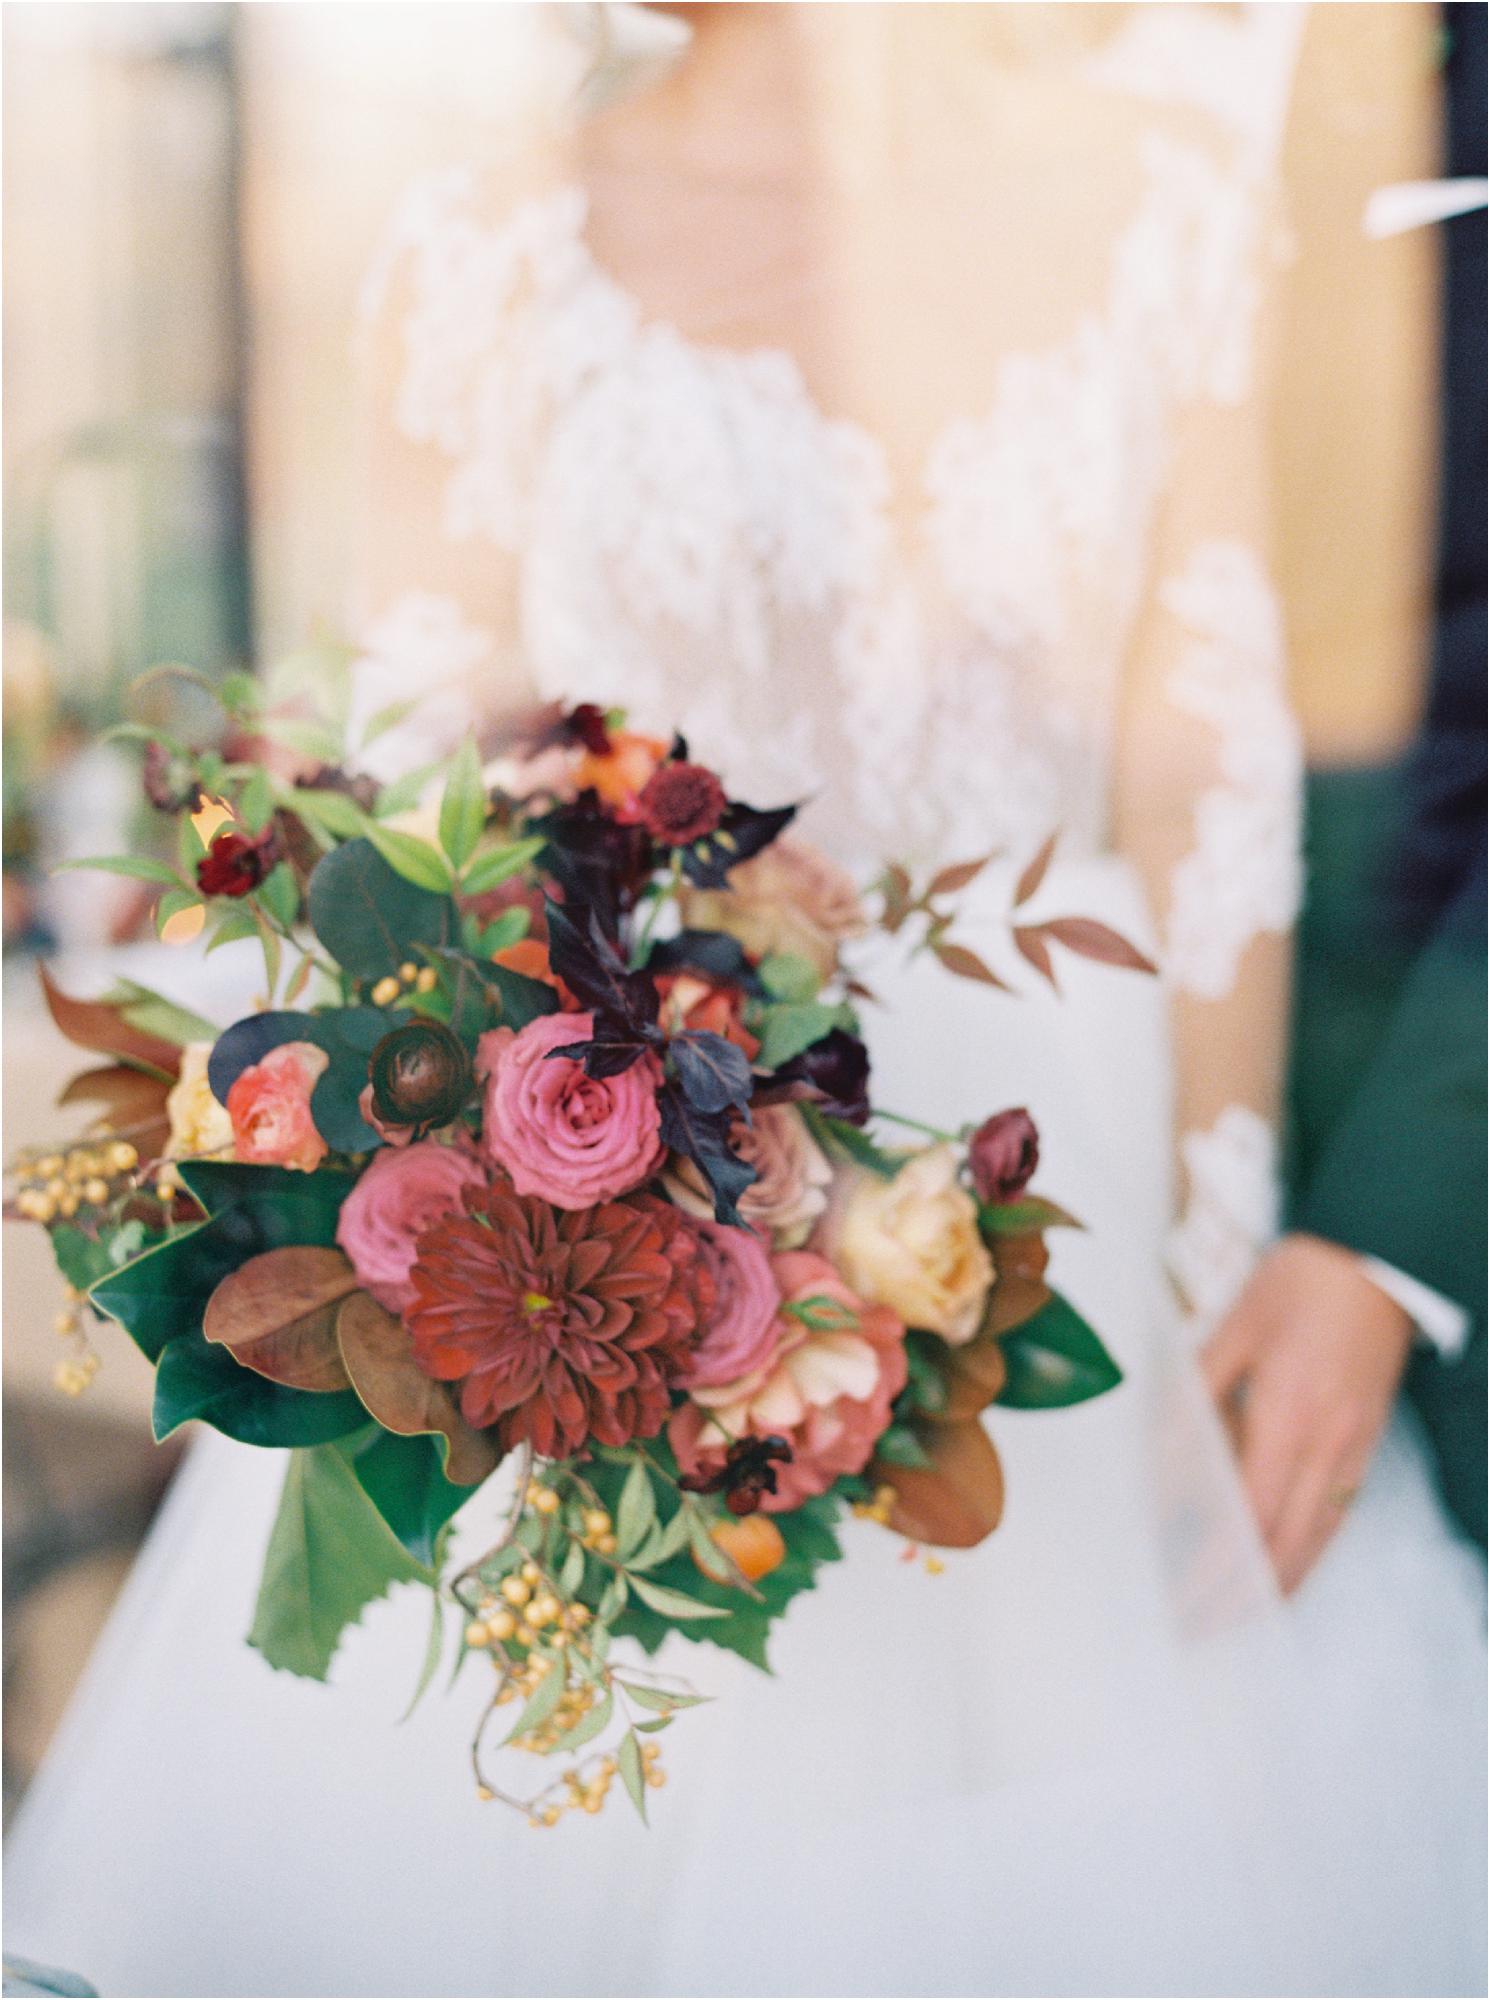 Flathead Lake Wedding Inspiration with Goldfinch Events and Design http://goldfinchevents.com Mum's Flowers http://mumsflowers.net